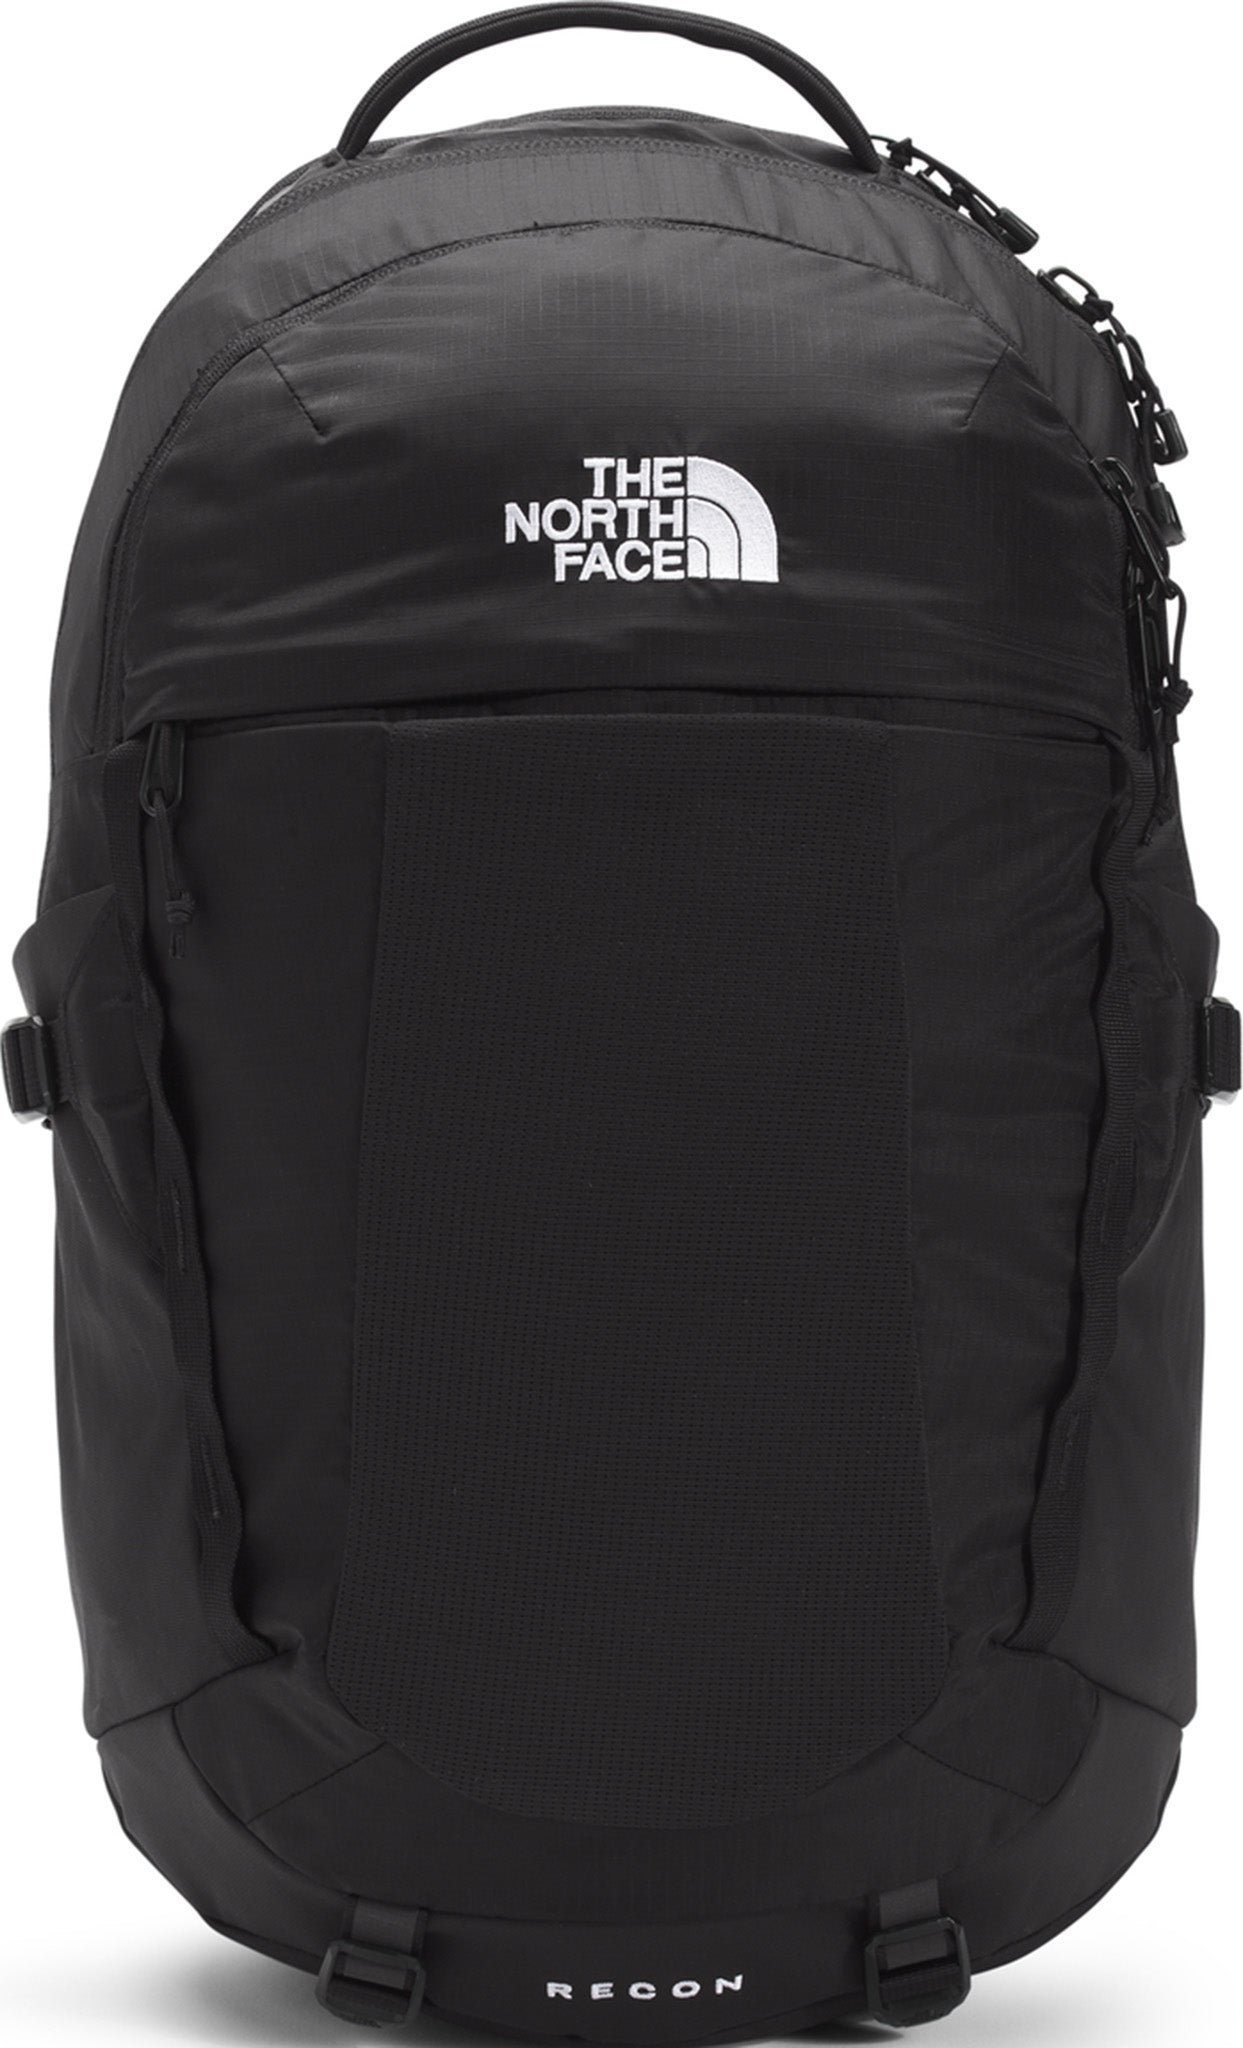 The North Face Recon Backpack 30L - Women's